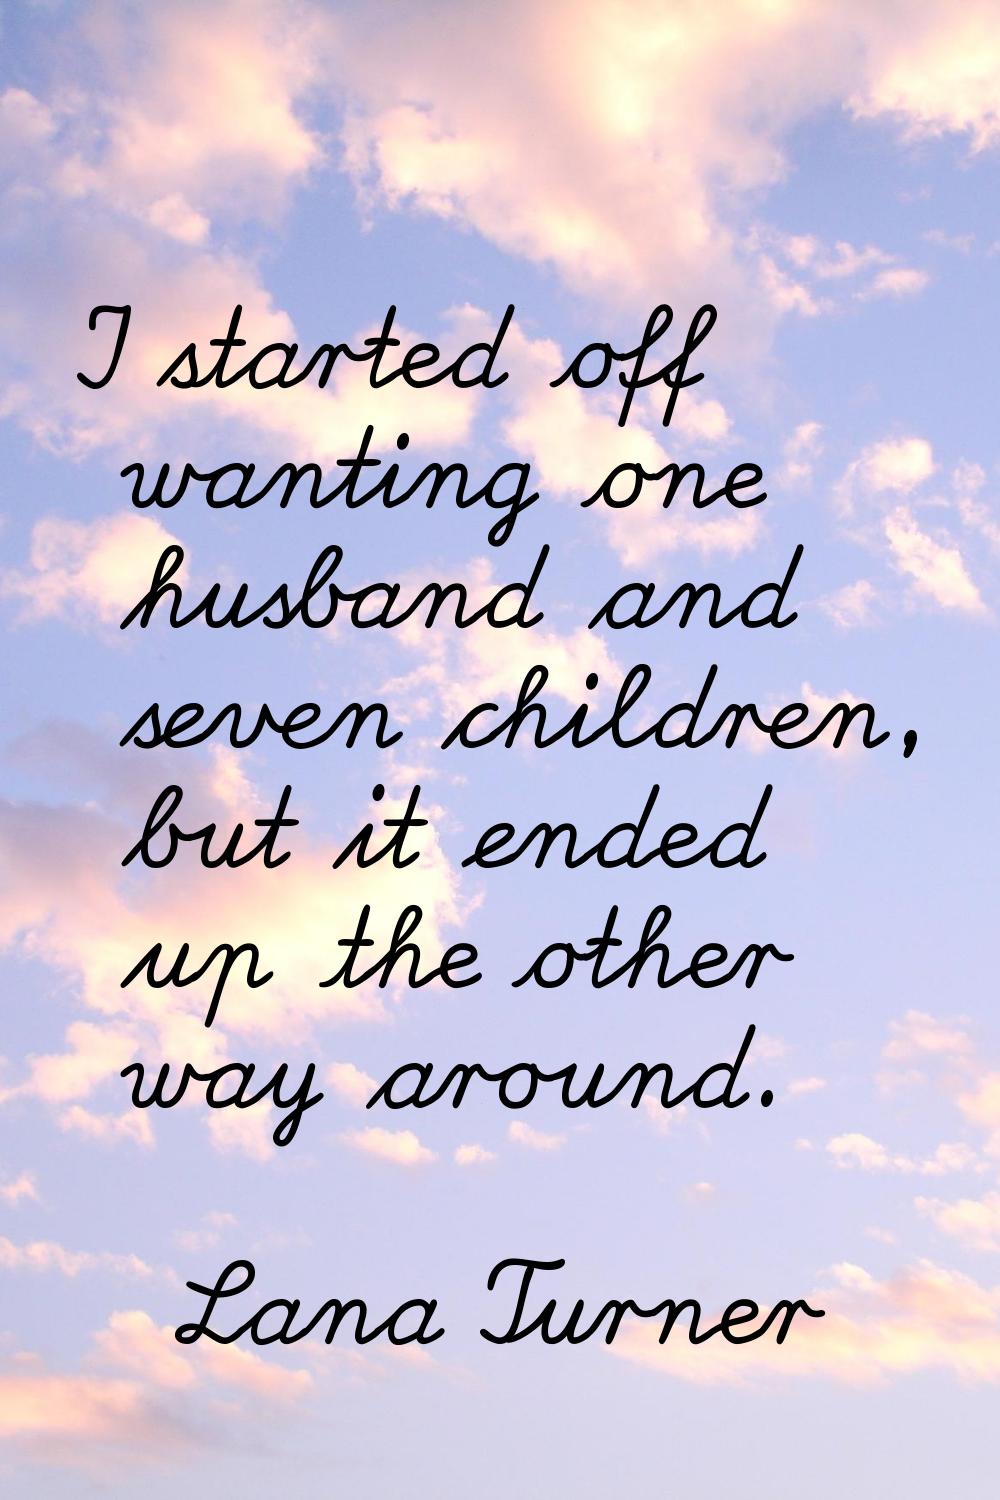 I started off wanting one husband and seven children, but it ended up the other way around.